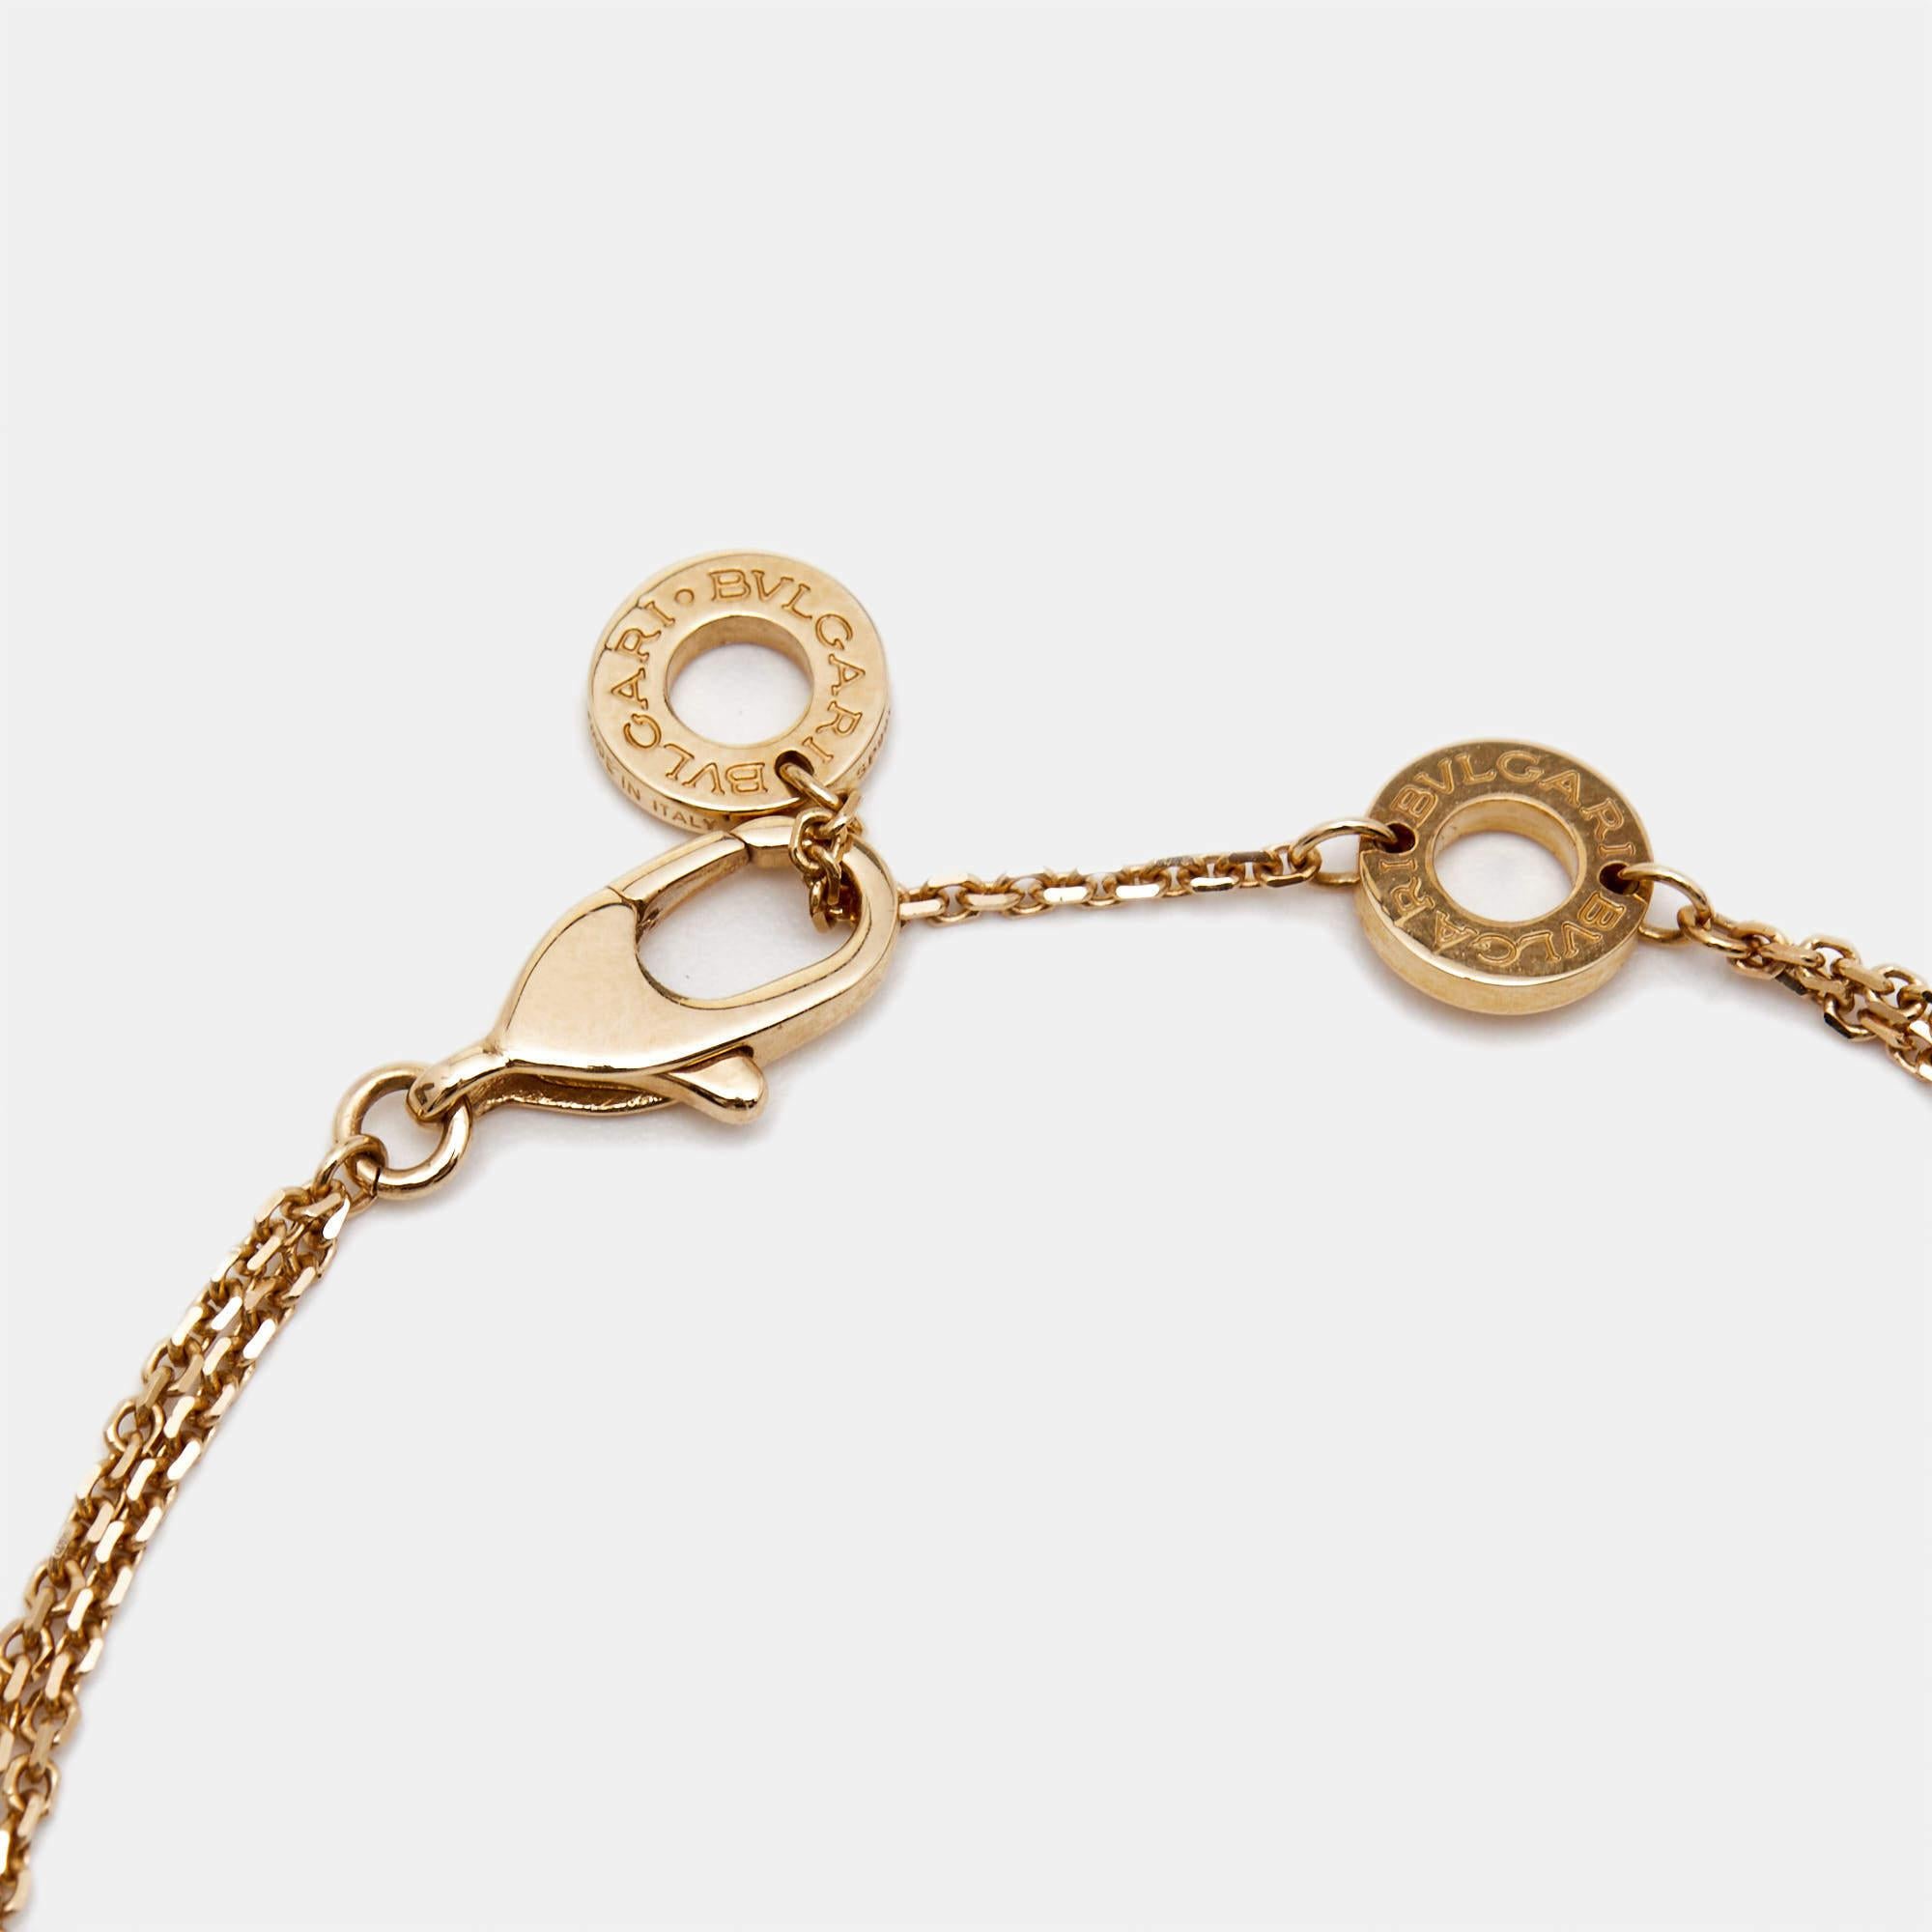 Ultra-modern and chic in design, this Bvlgari bracelet exhibits contemporary fashion. The luxe design is set with distinct elements to give the creation a classy touch. This sweet piece will look great when paired with other bracelets and even